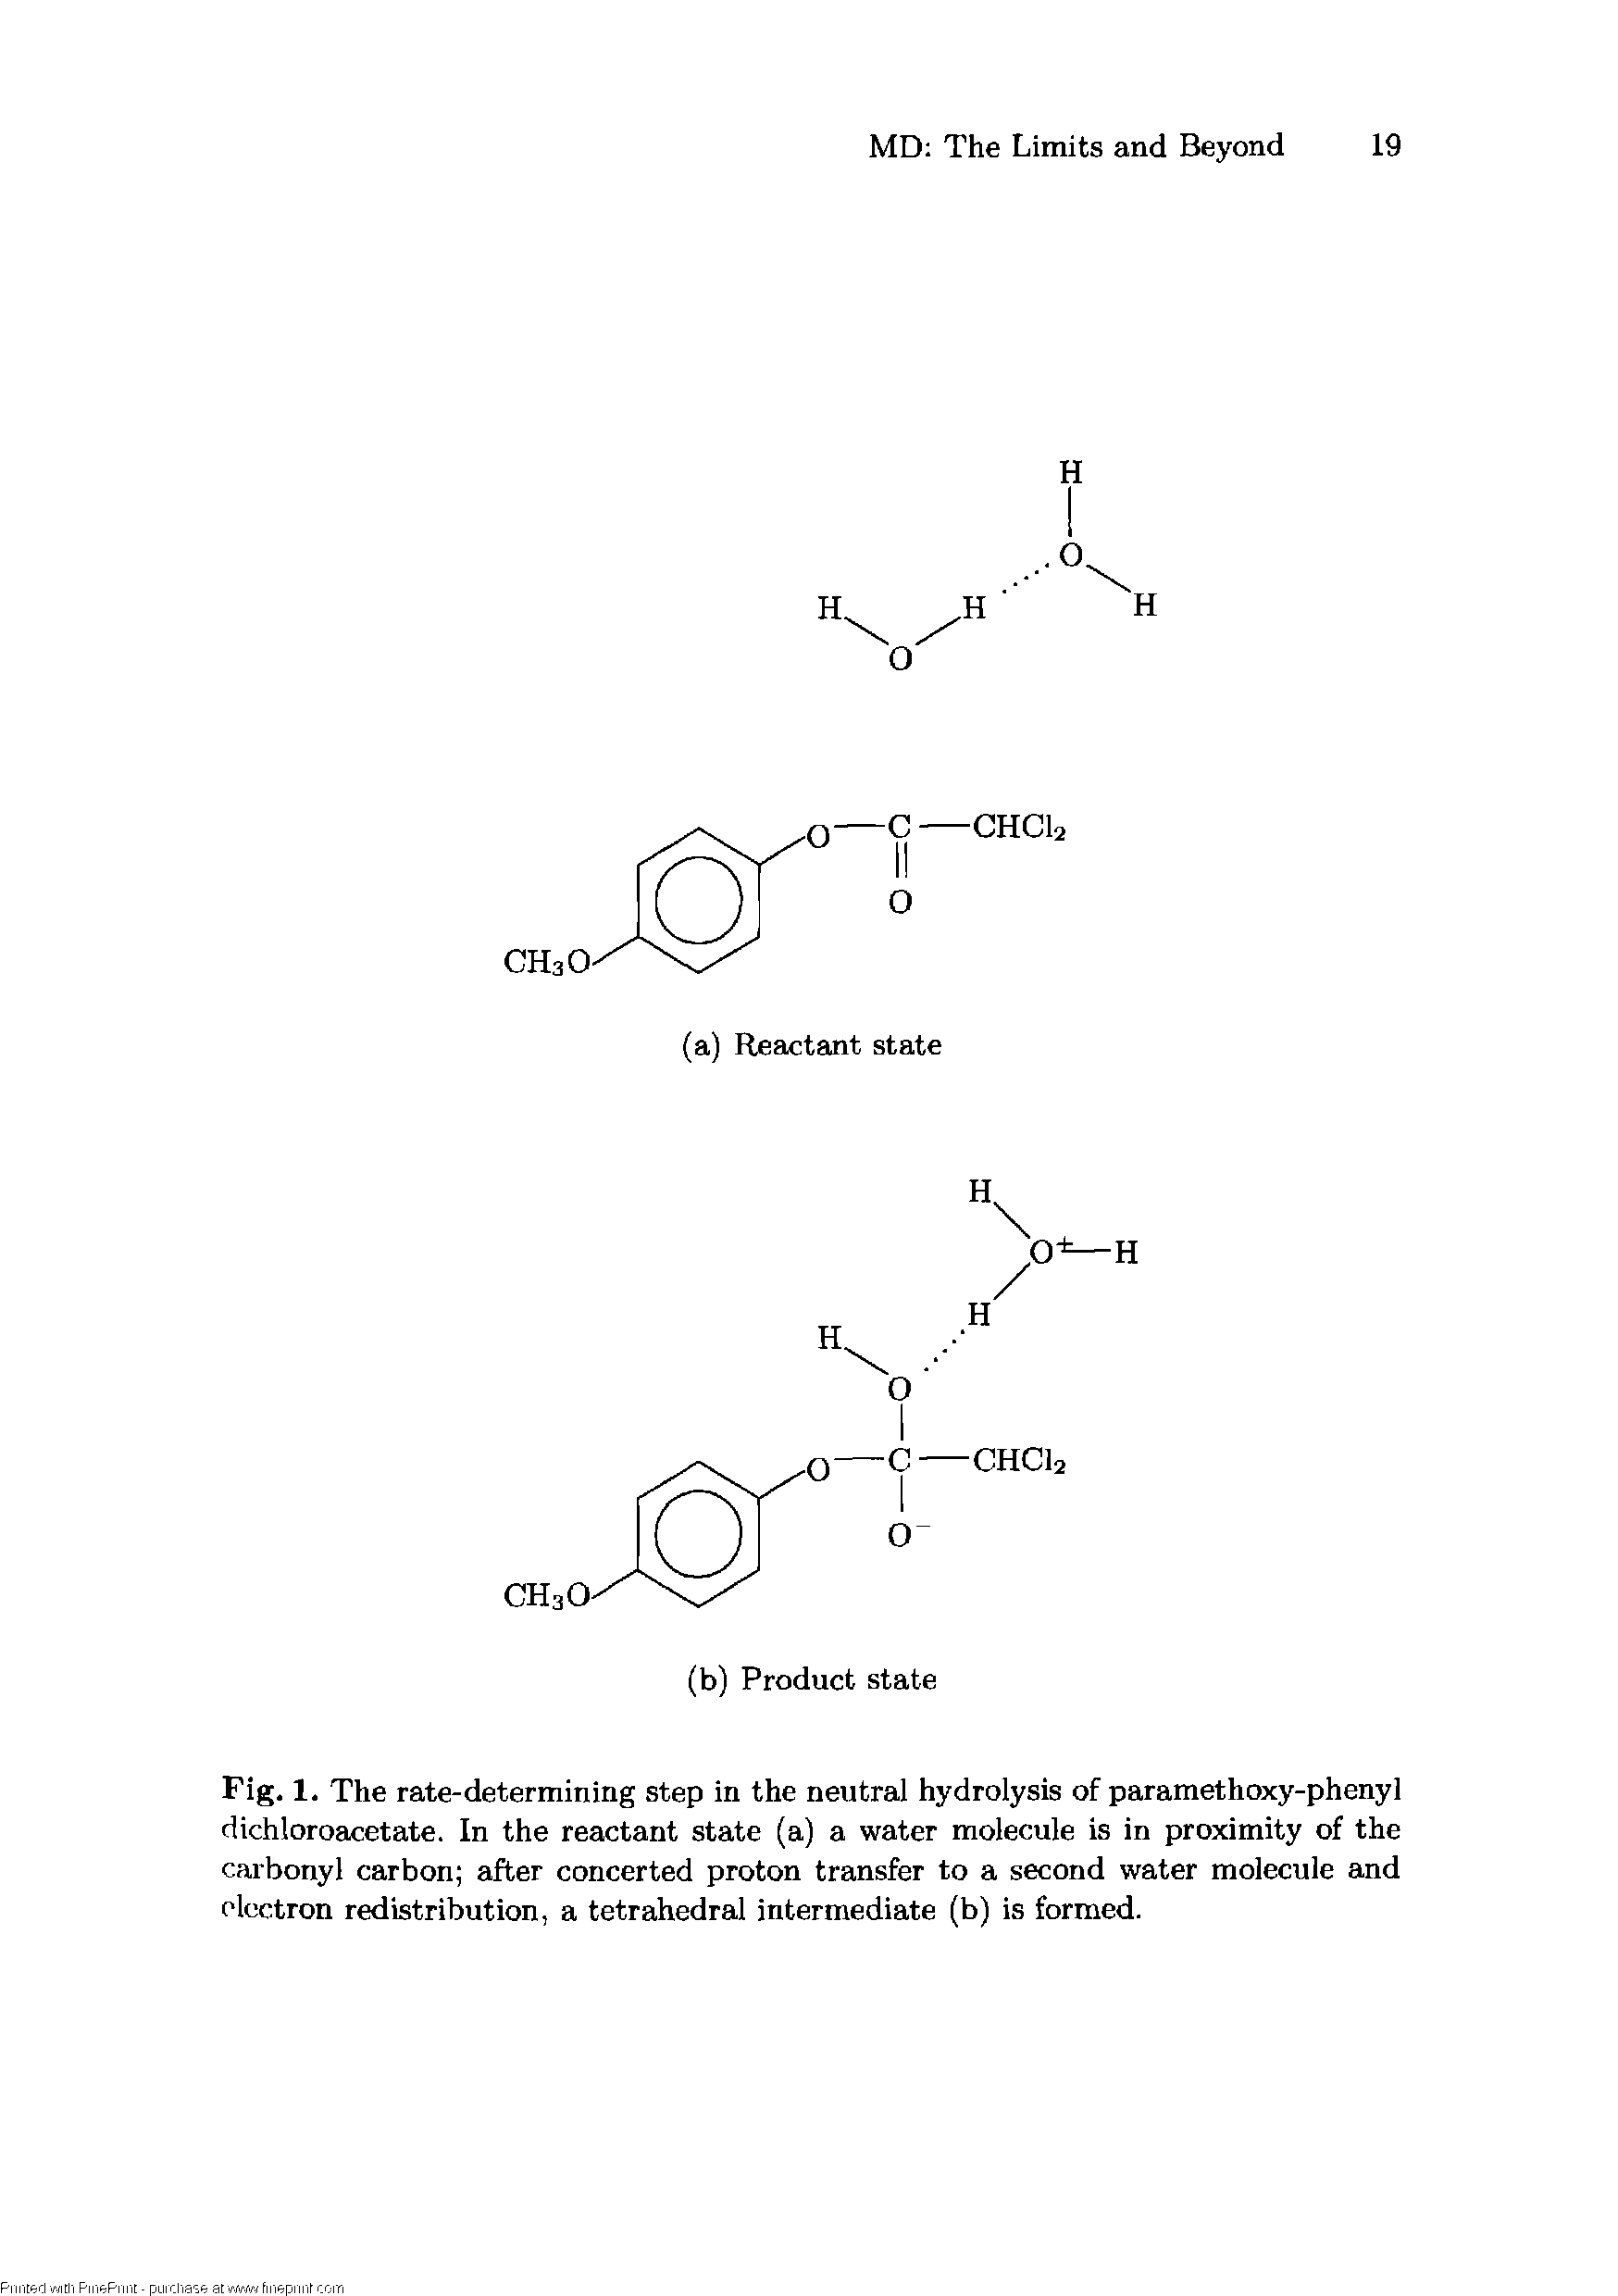 Fig. 1. The rate-determining step in the neutral hydrolysis of paramethoxy-phenyl dichloroacetate. In the reactant state (a) a water molecule is in proximity of the carbonyl carbon after concerted proton transfer to a second water molecule and electron redistribution, a tetrahedral intermediate (b) is formed.